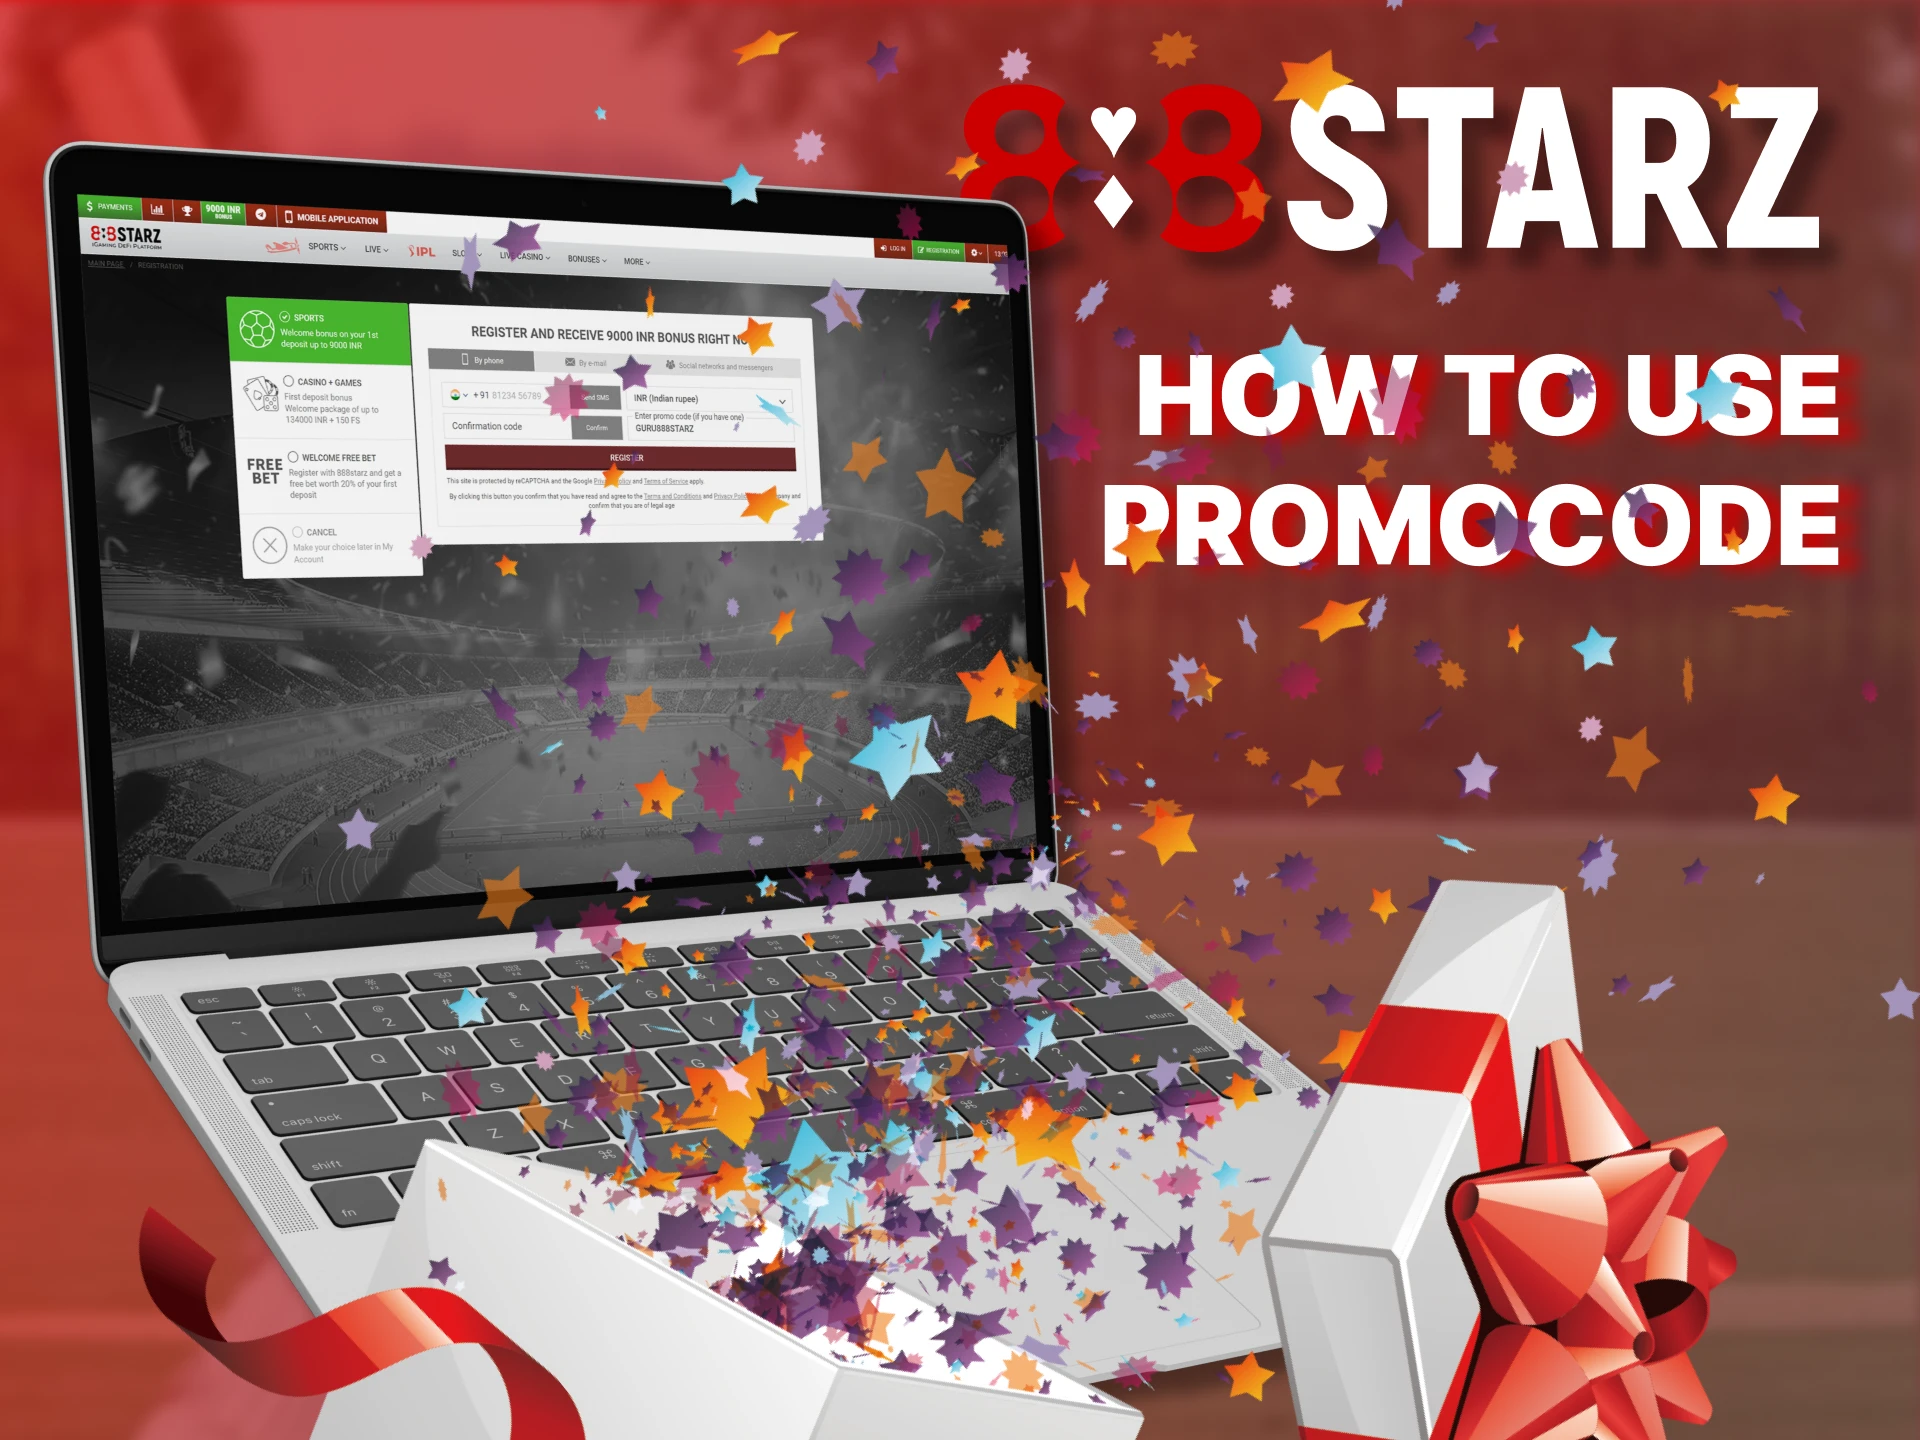 Use these instructions to get the benefits of 888Starz promo code.